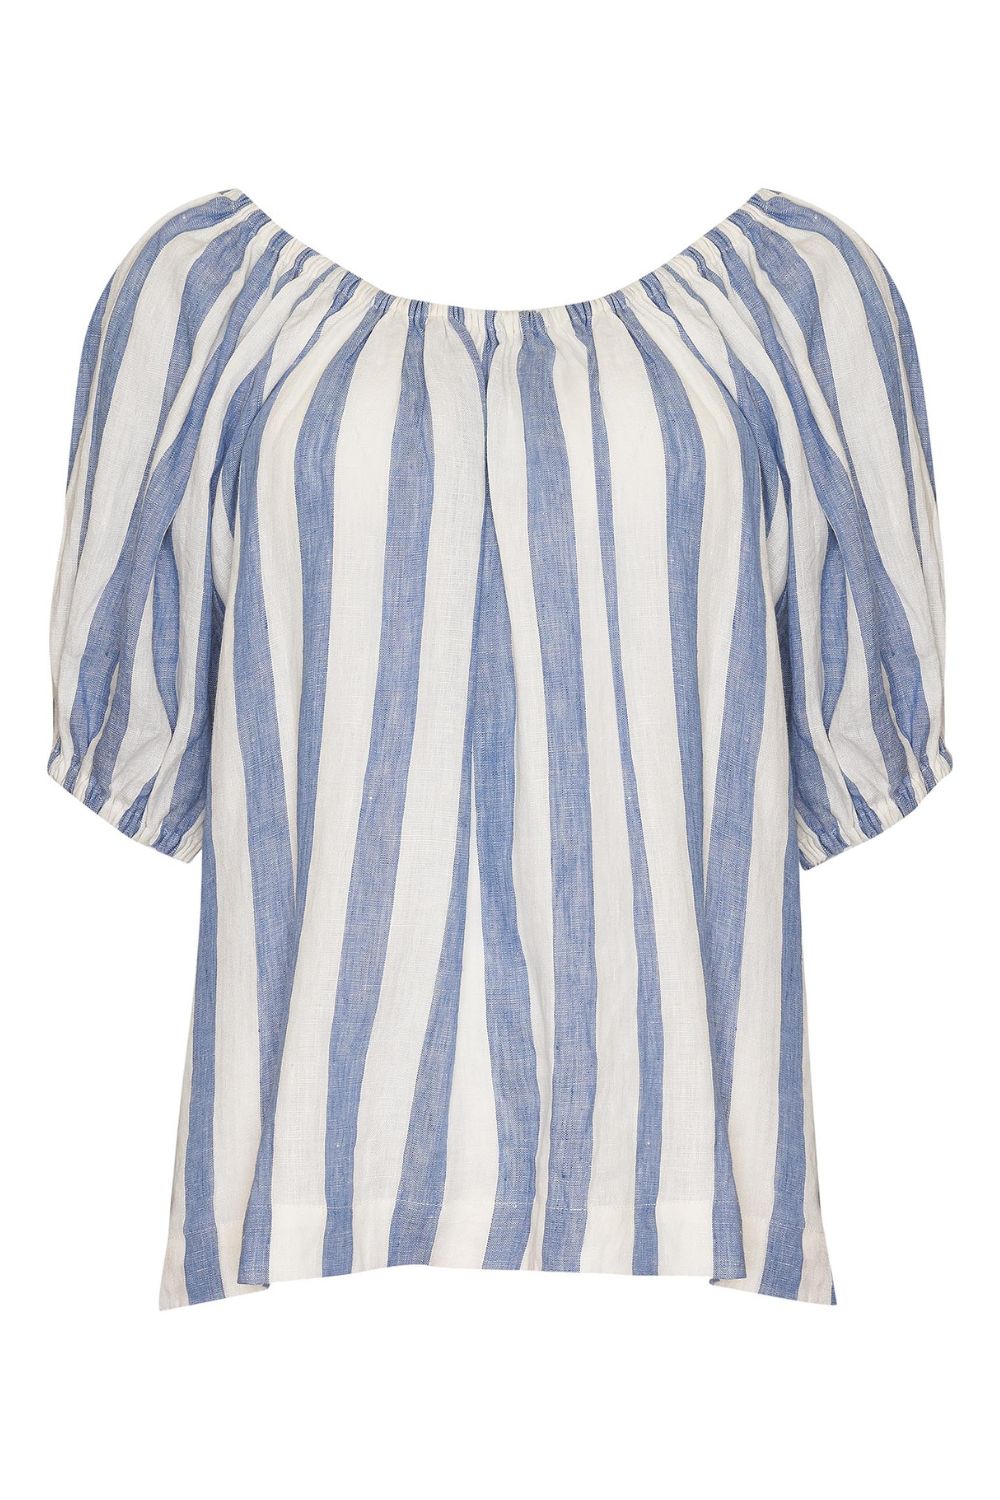 blue and white stripe, top, off the shoulder, mid length sleeve, product image